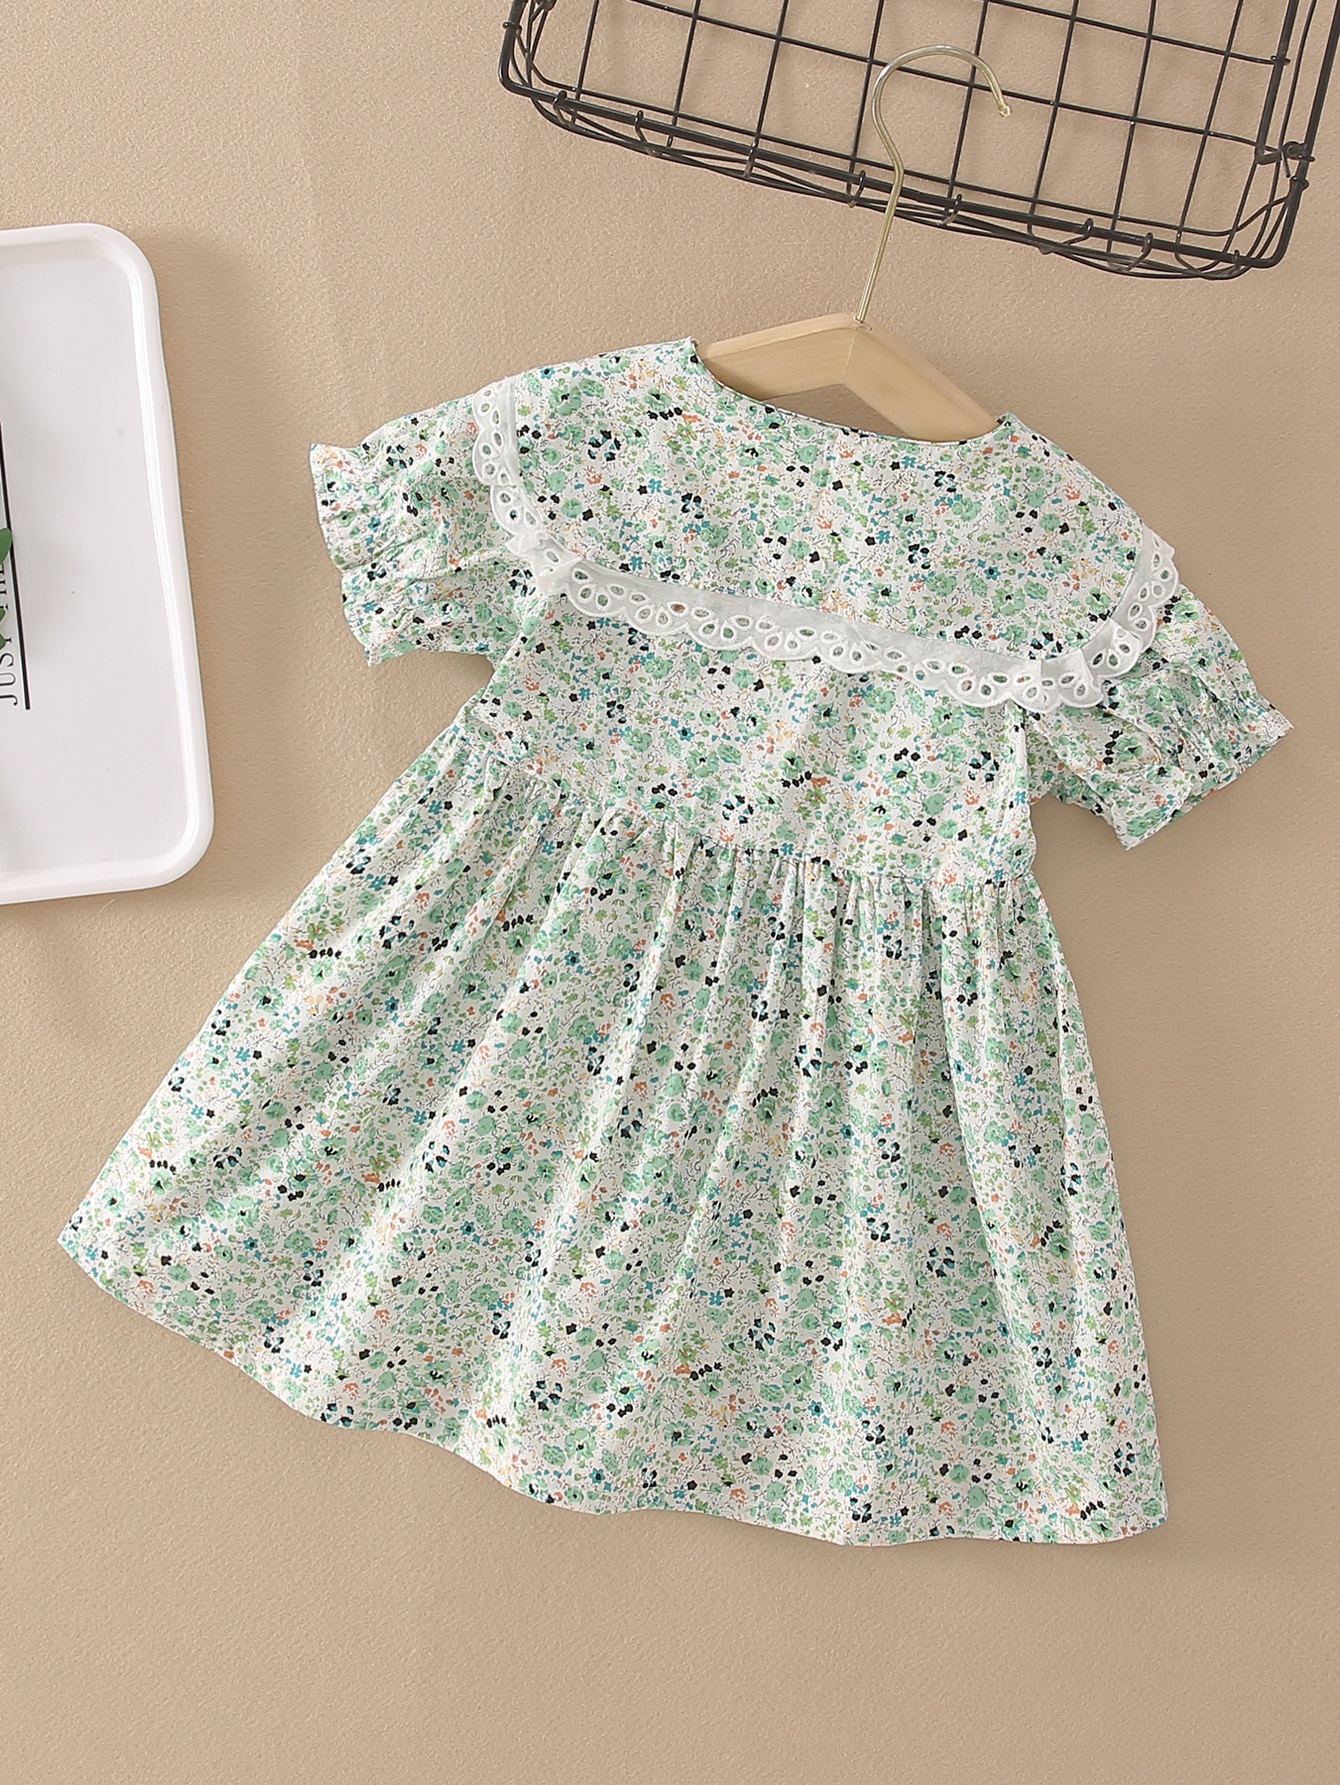 baby Toddler girls cotton dress uk patterns preppy kids dresses with button small MOQ